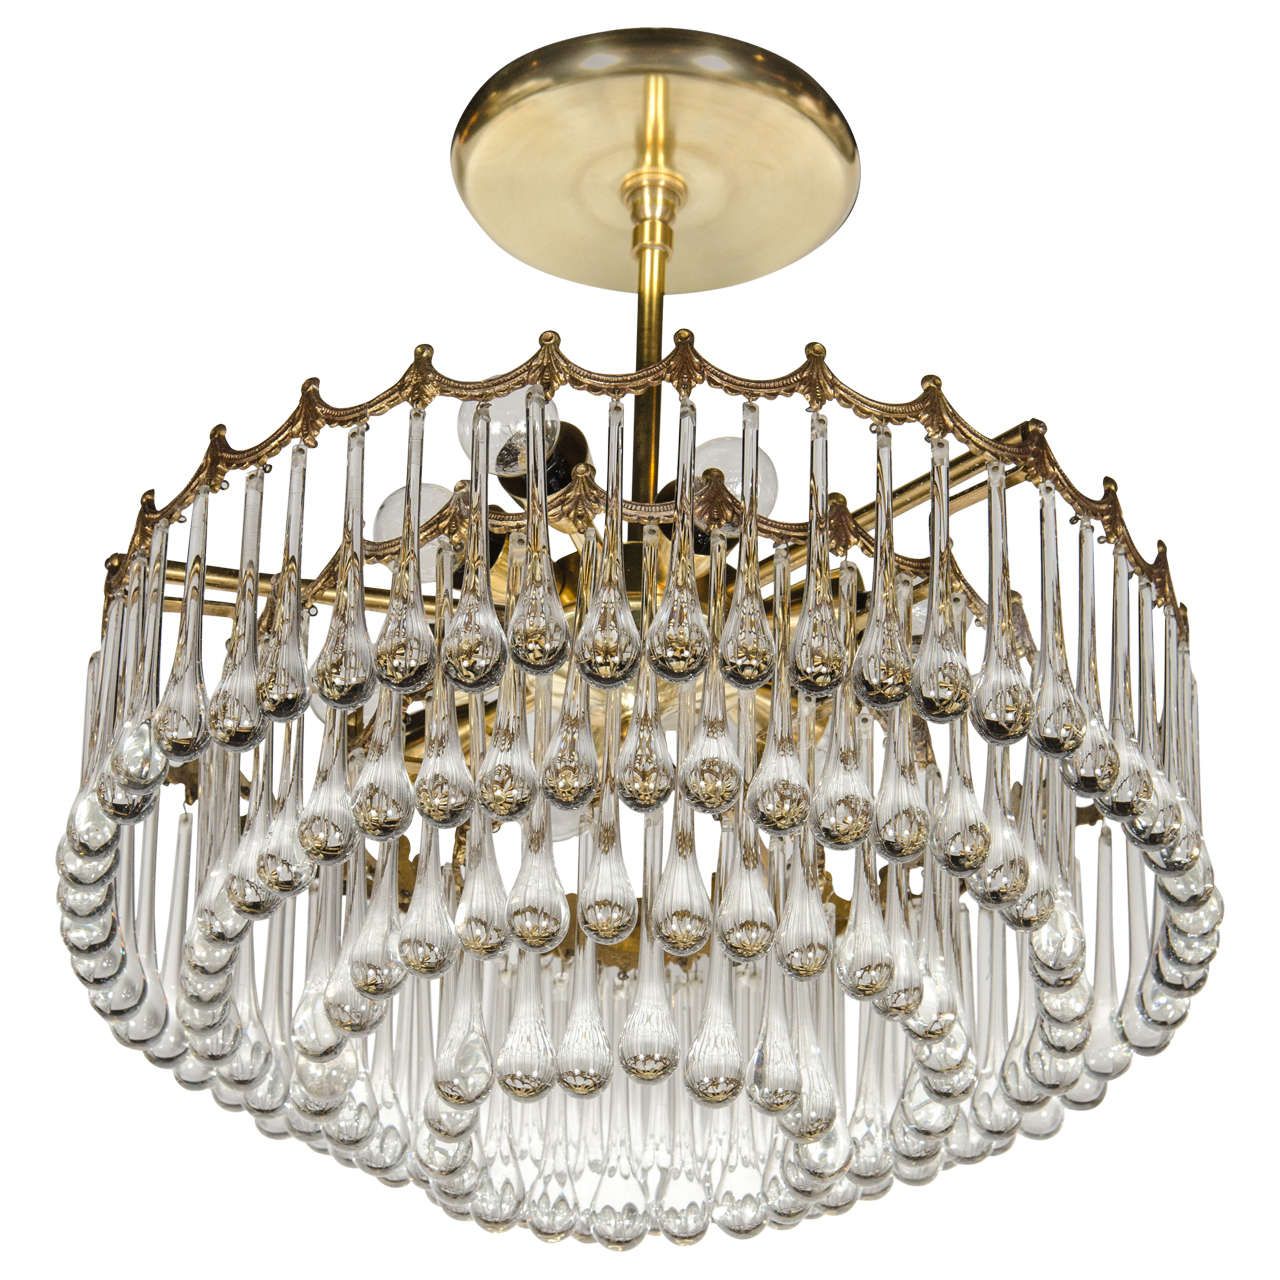 1940s Hollywood Four Tier Teardrop Chandelier With Brass In Brass Four Light Chandeliers (View 14 of 15)